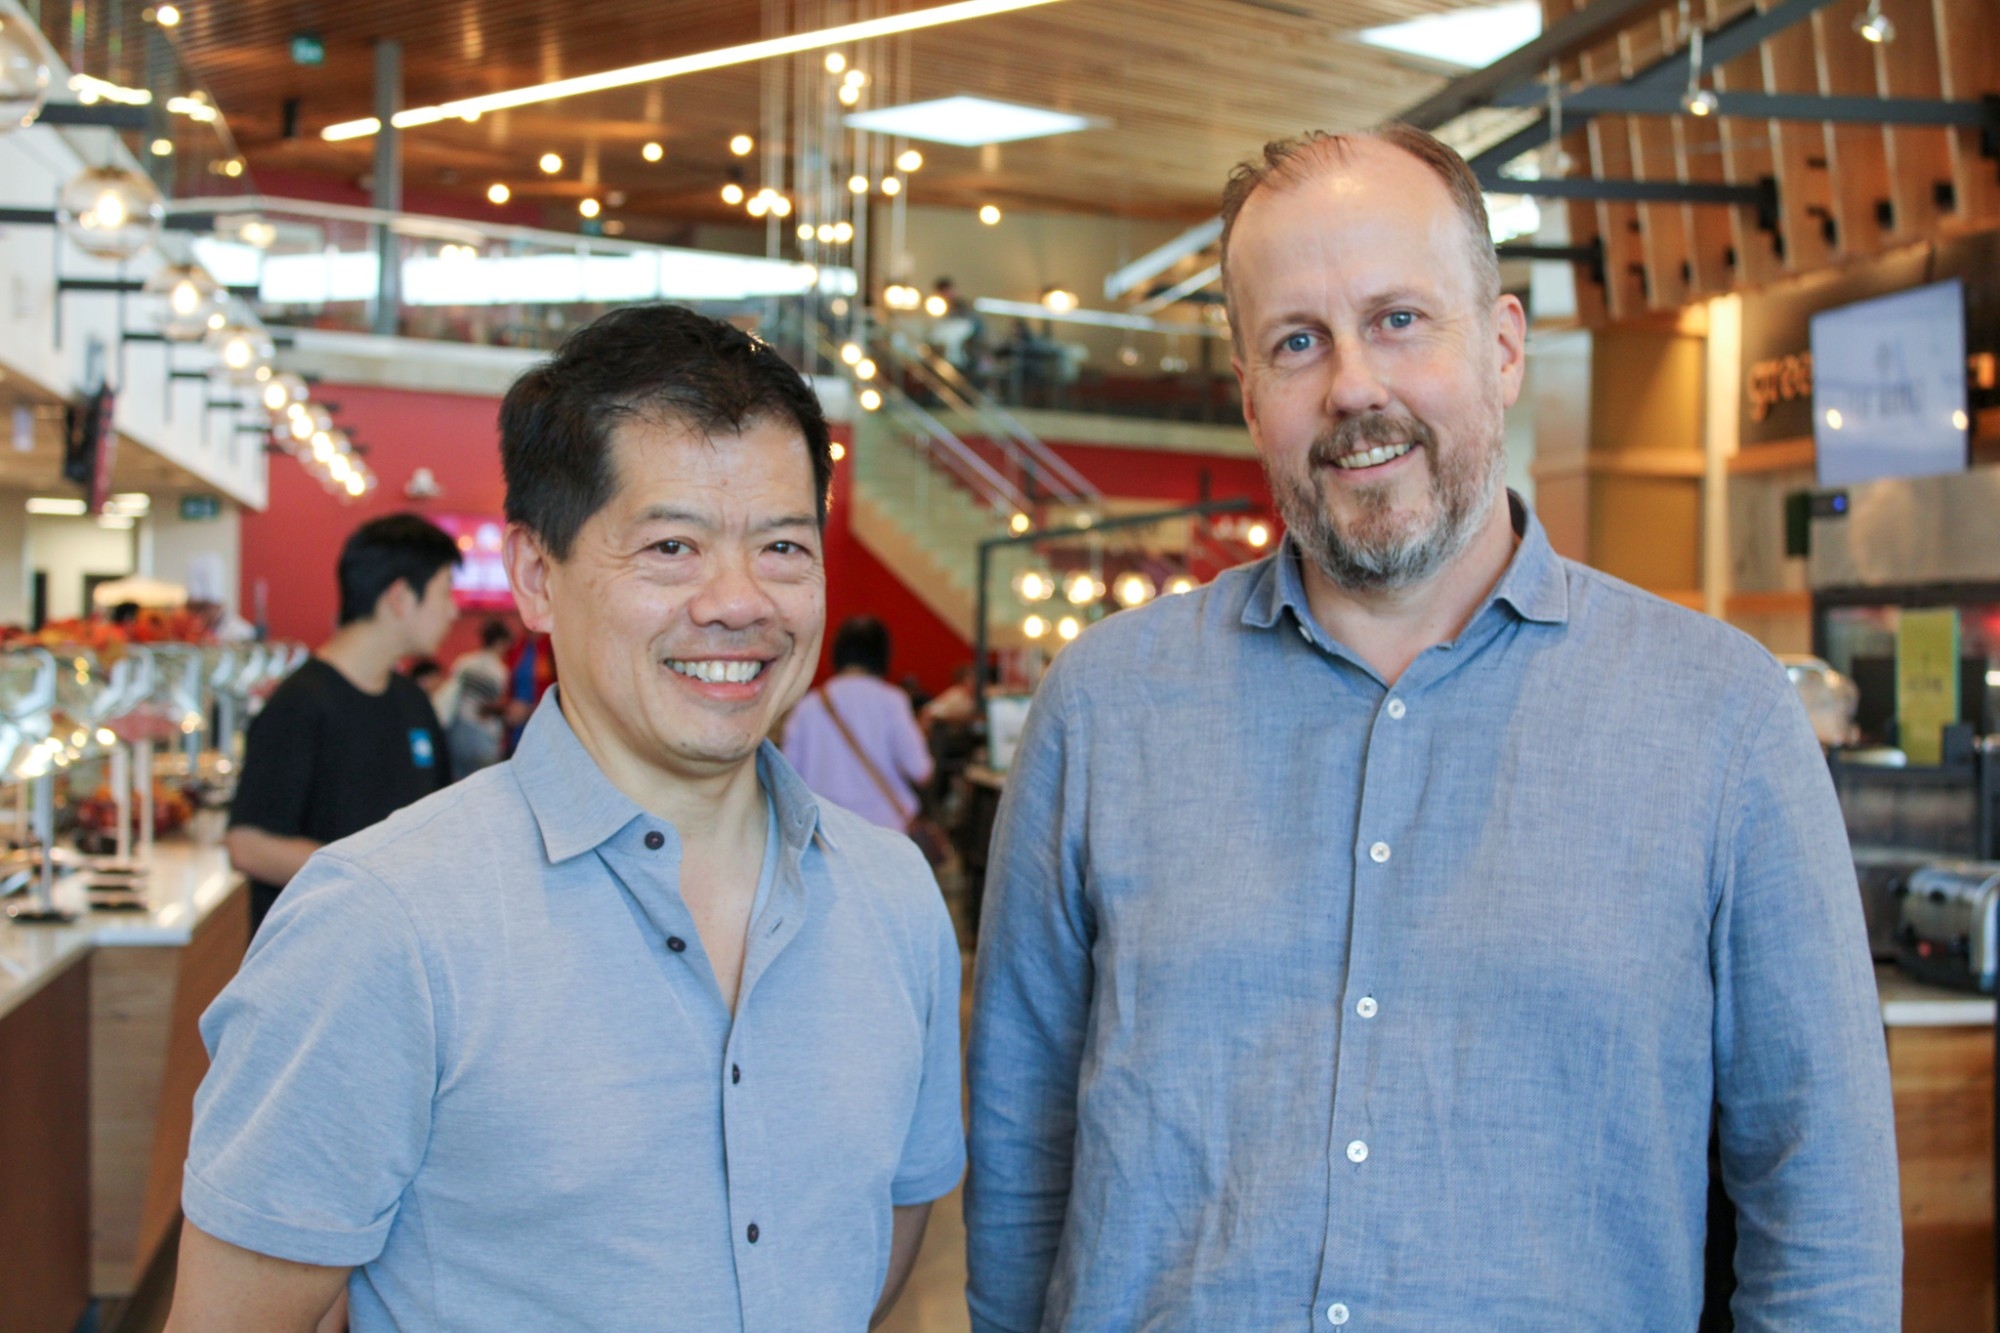 Photo of two people standing side by side, one shorter wearing a blue short sleeved shirt, the other taller with a beard and blue long sleeved shirt. The interior Dining Commons at SFU can be seen in the background.